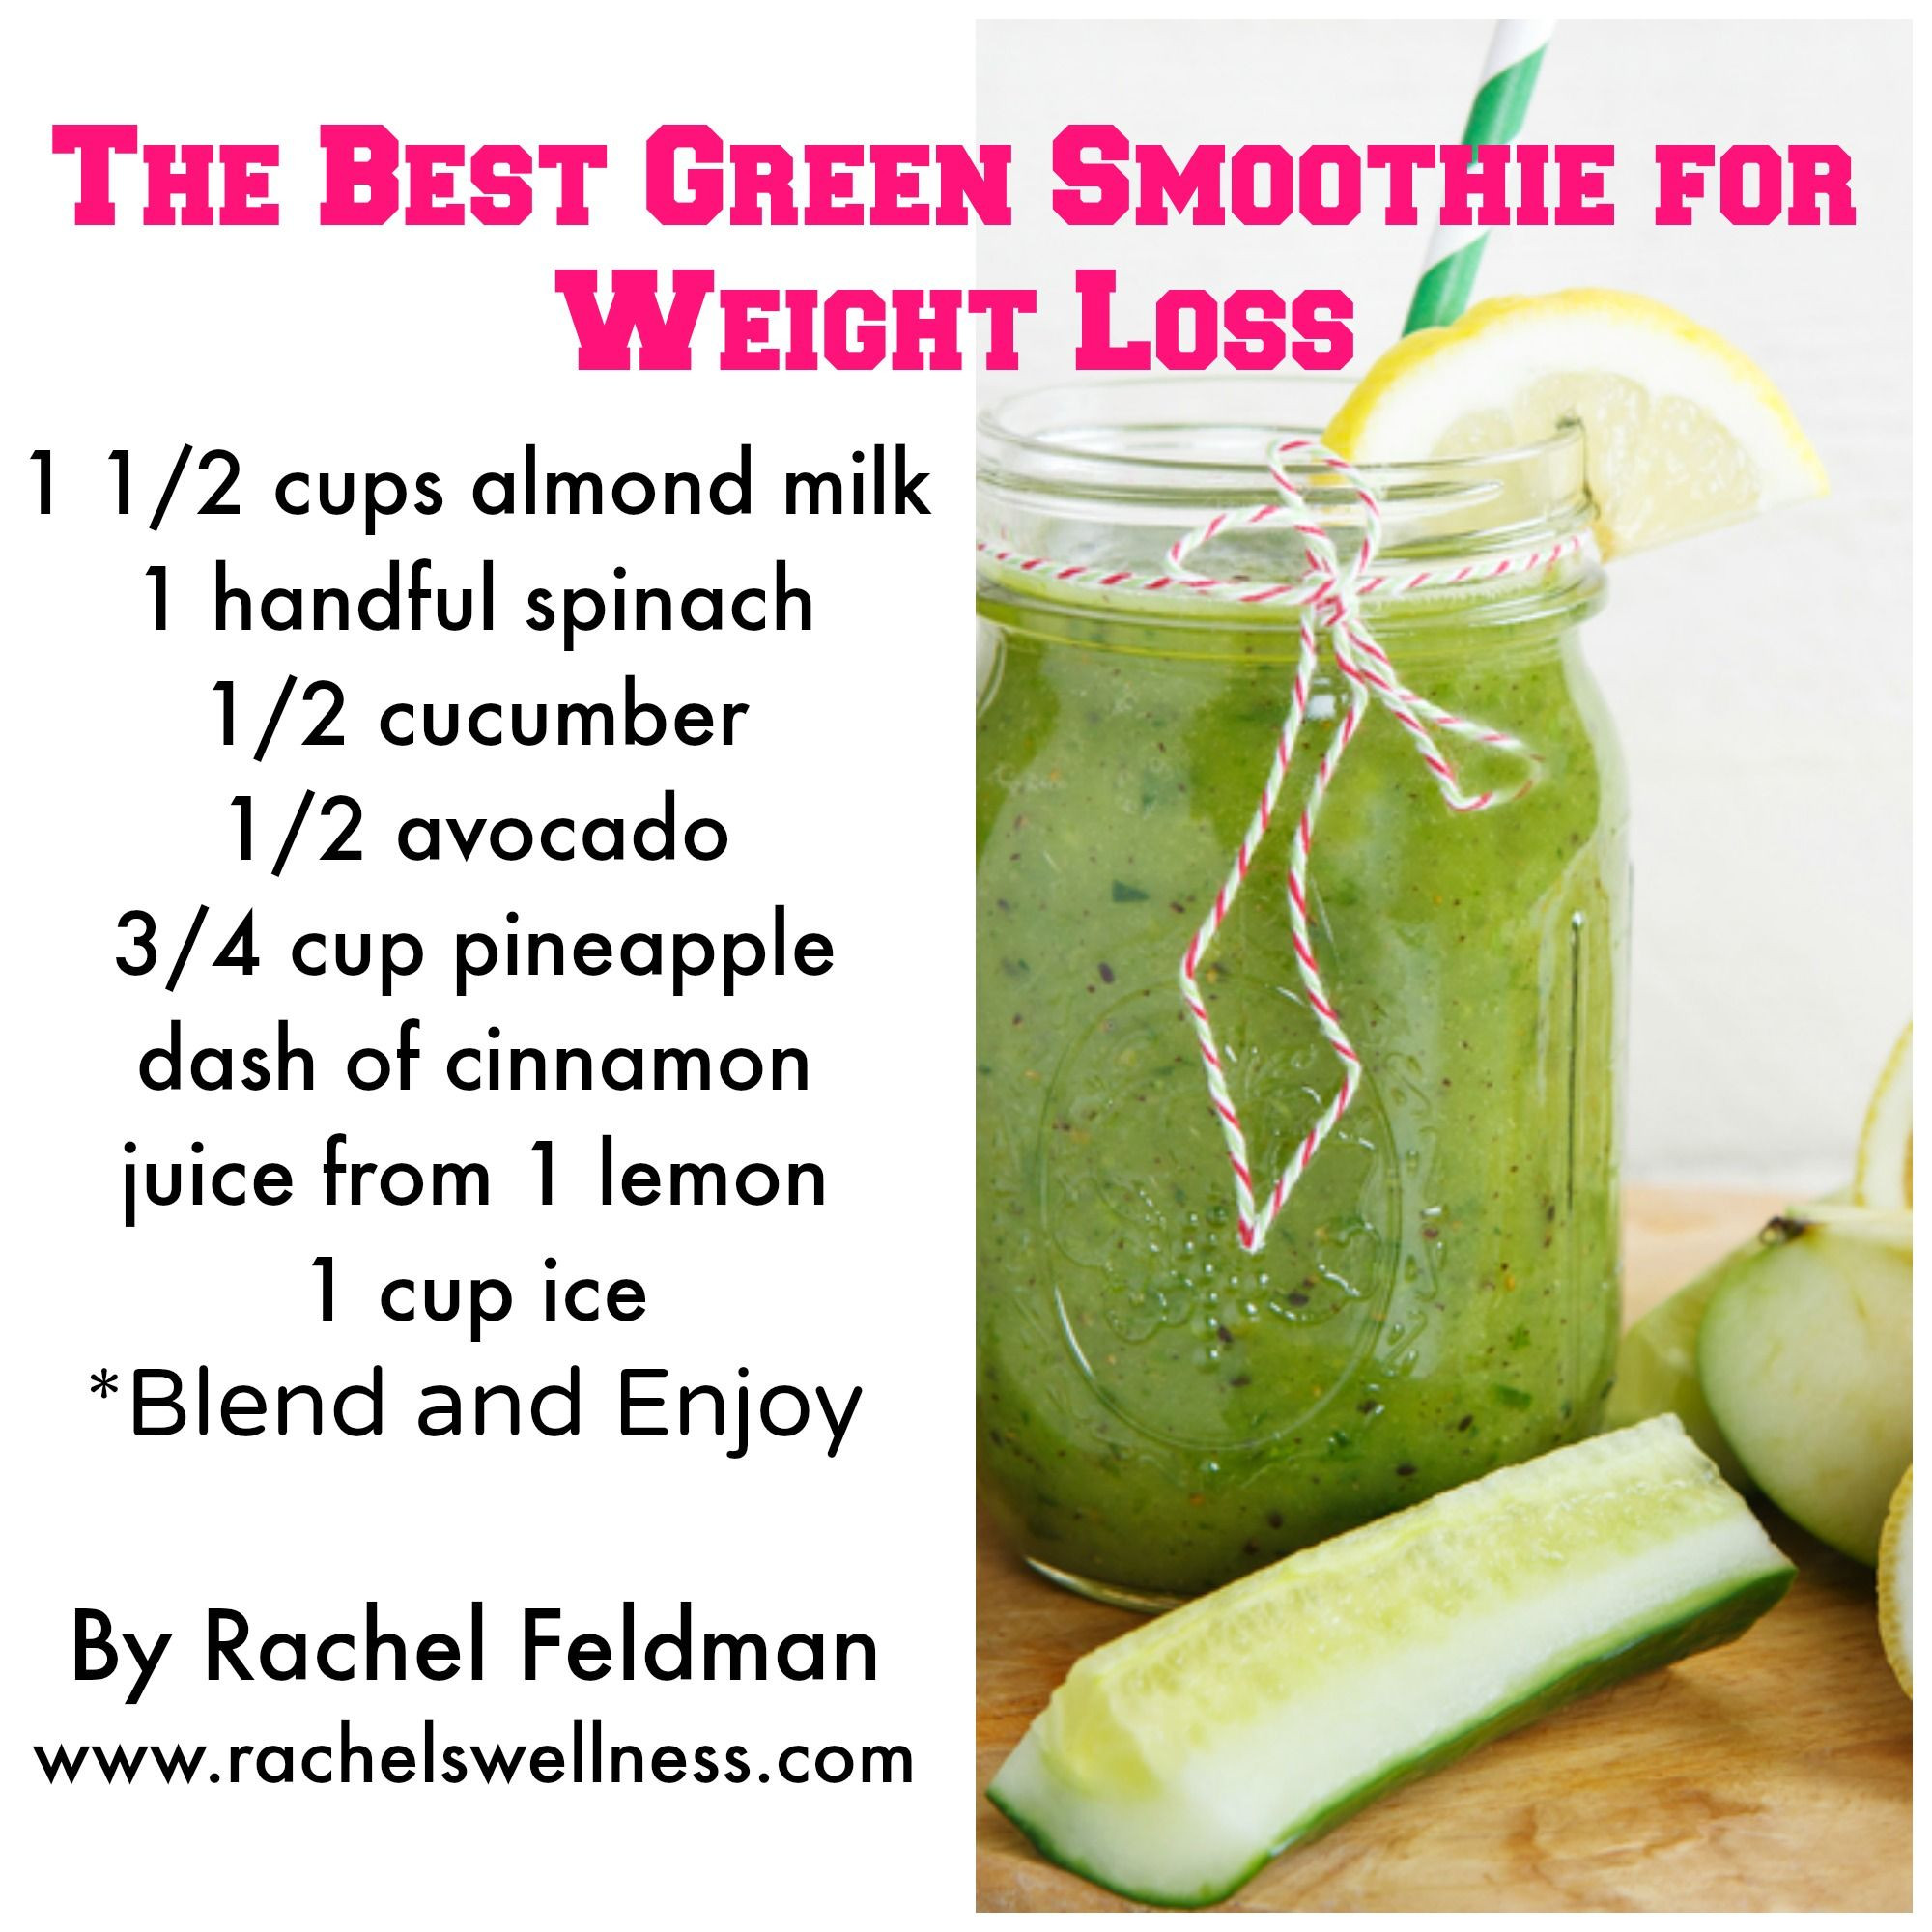 Green Smoothie Recipes For Weight Loss
 7 Healthy Green Smoothie Recipes For Weight Loss